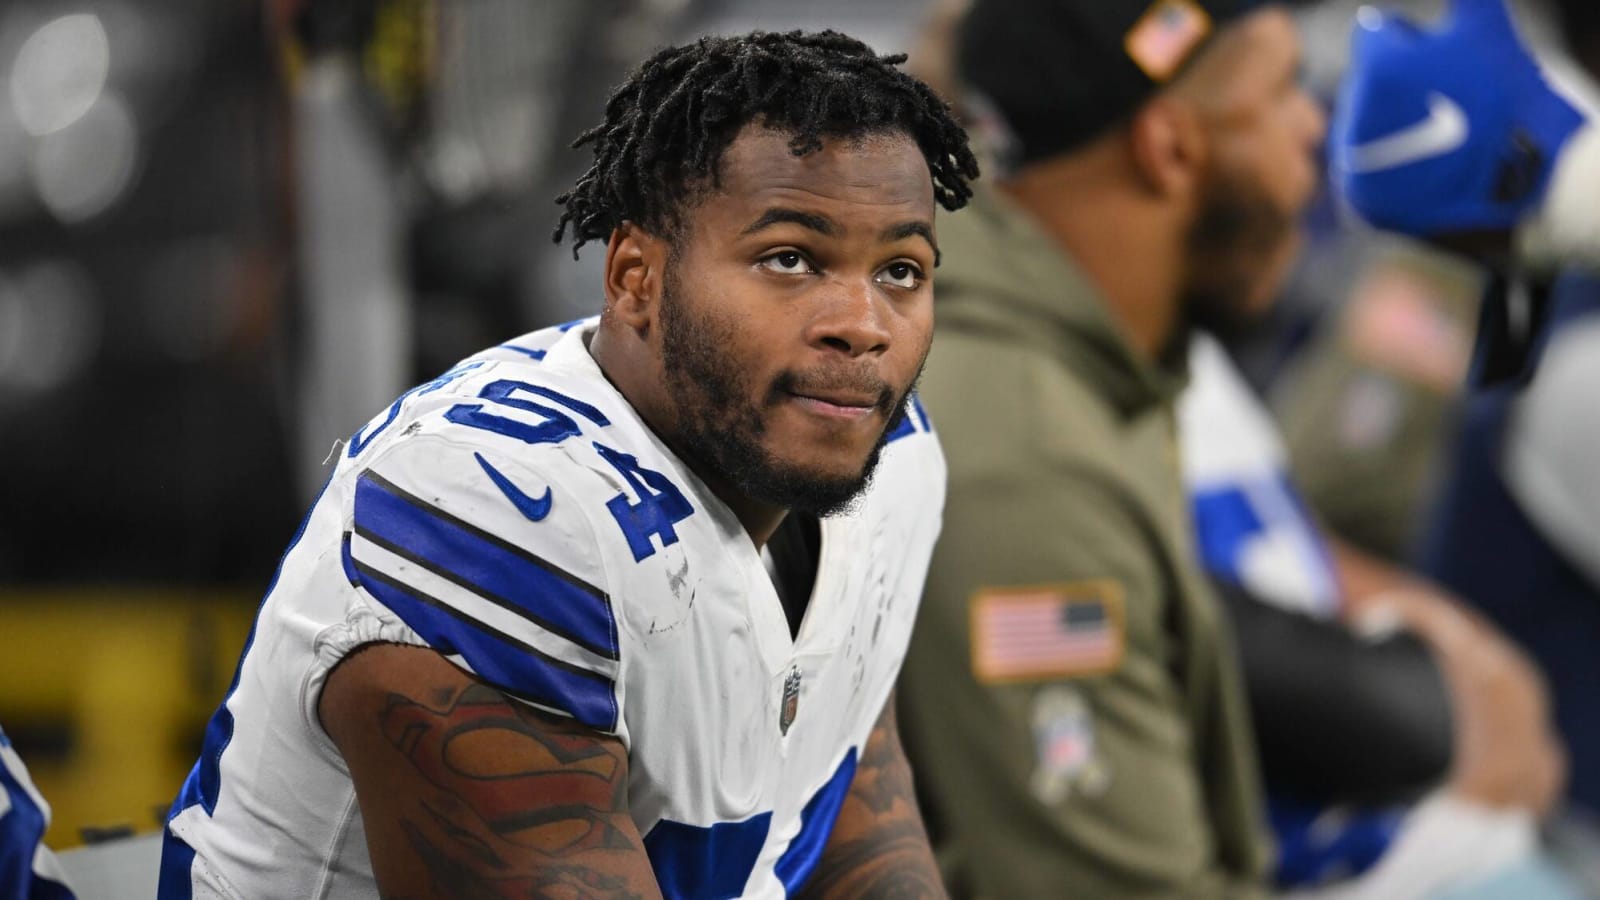 Cowboys player has warrant issued for arrest days before playoffs